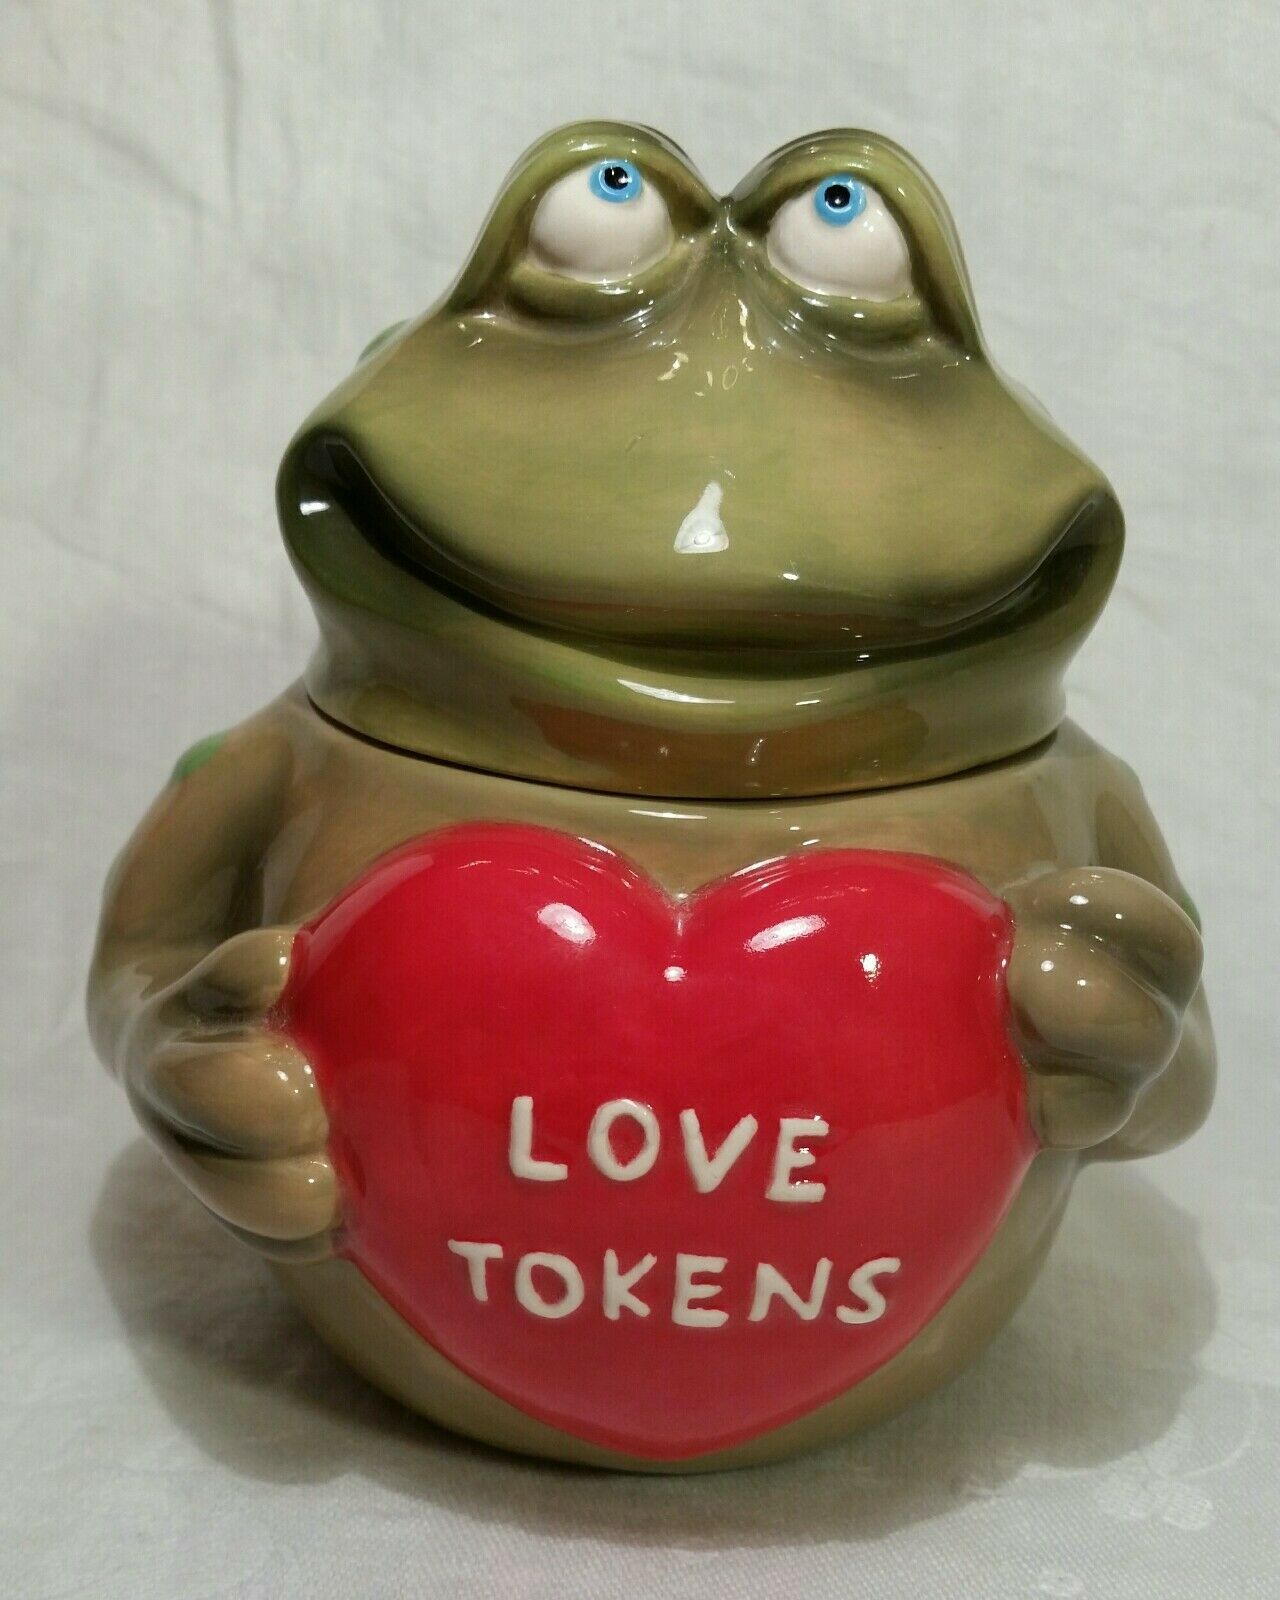 Green Frog Holding Red Love Tokens Heart, Ceramic Canister Jar 5", By Russ